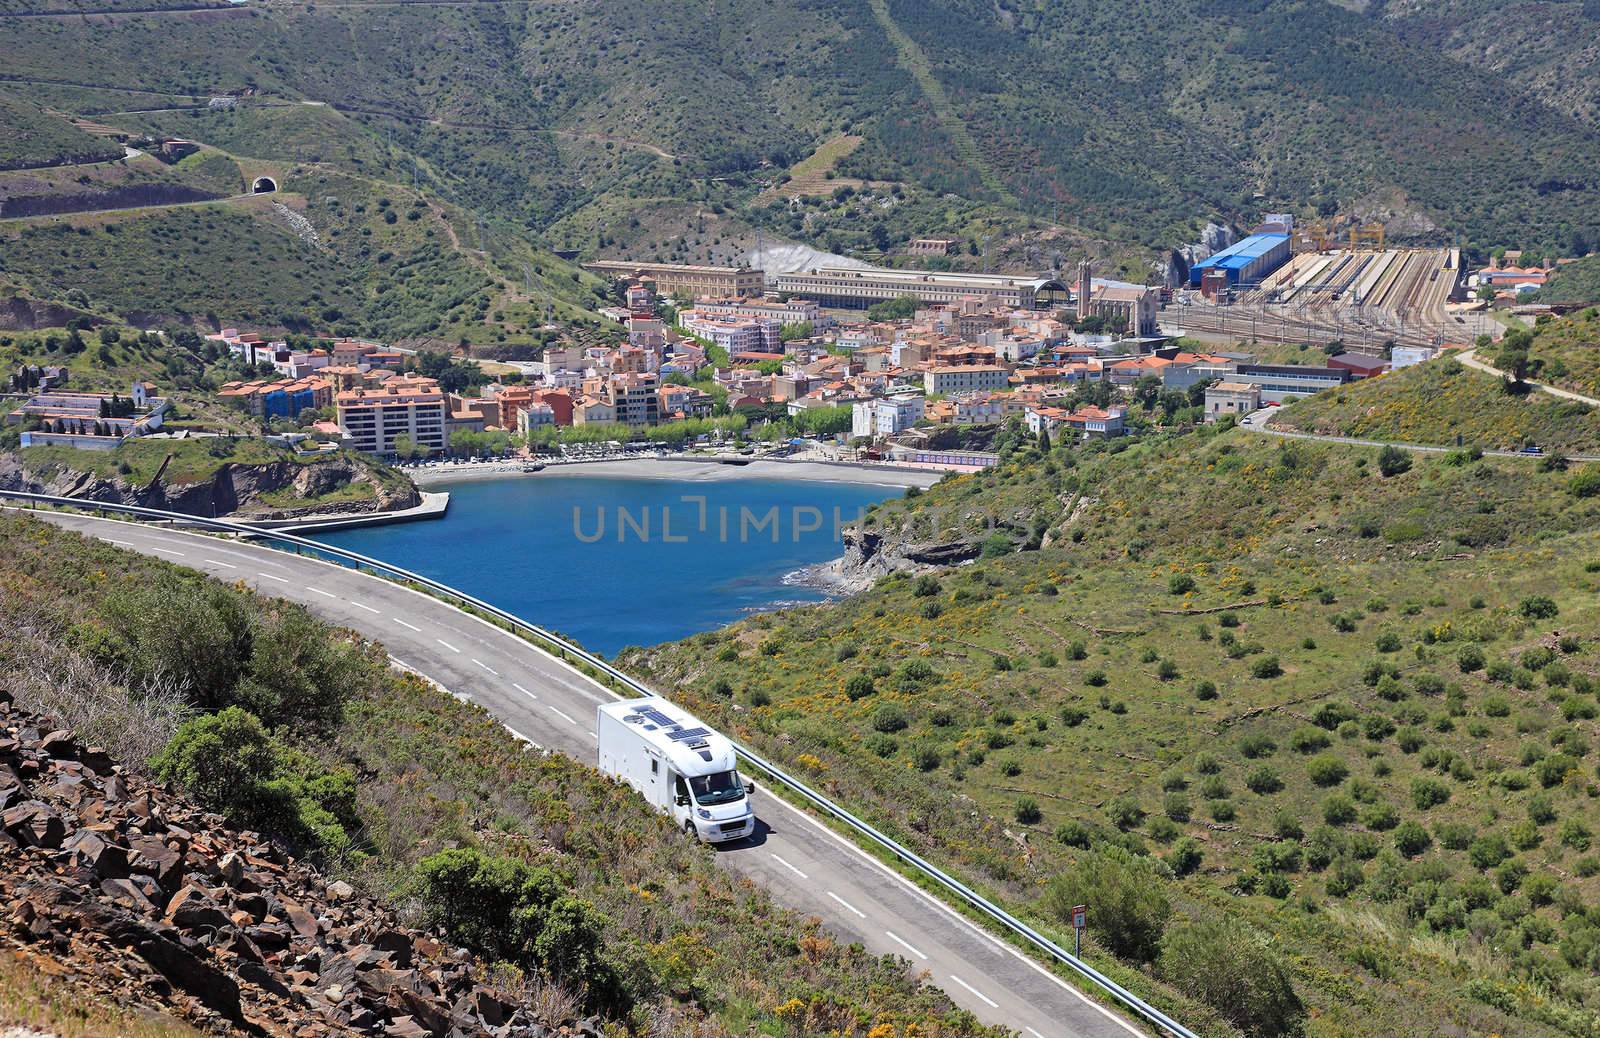 Camper on the road near spanish city Portbou, not far from borde by borodaev